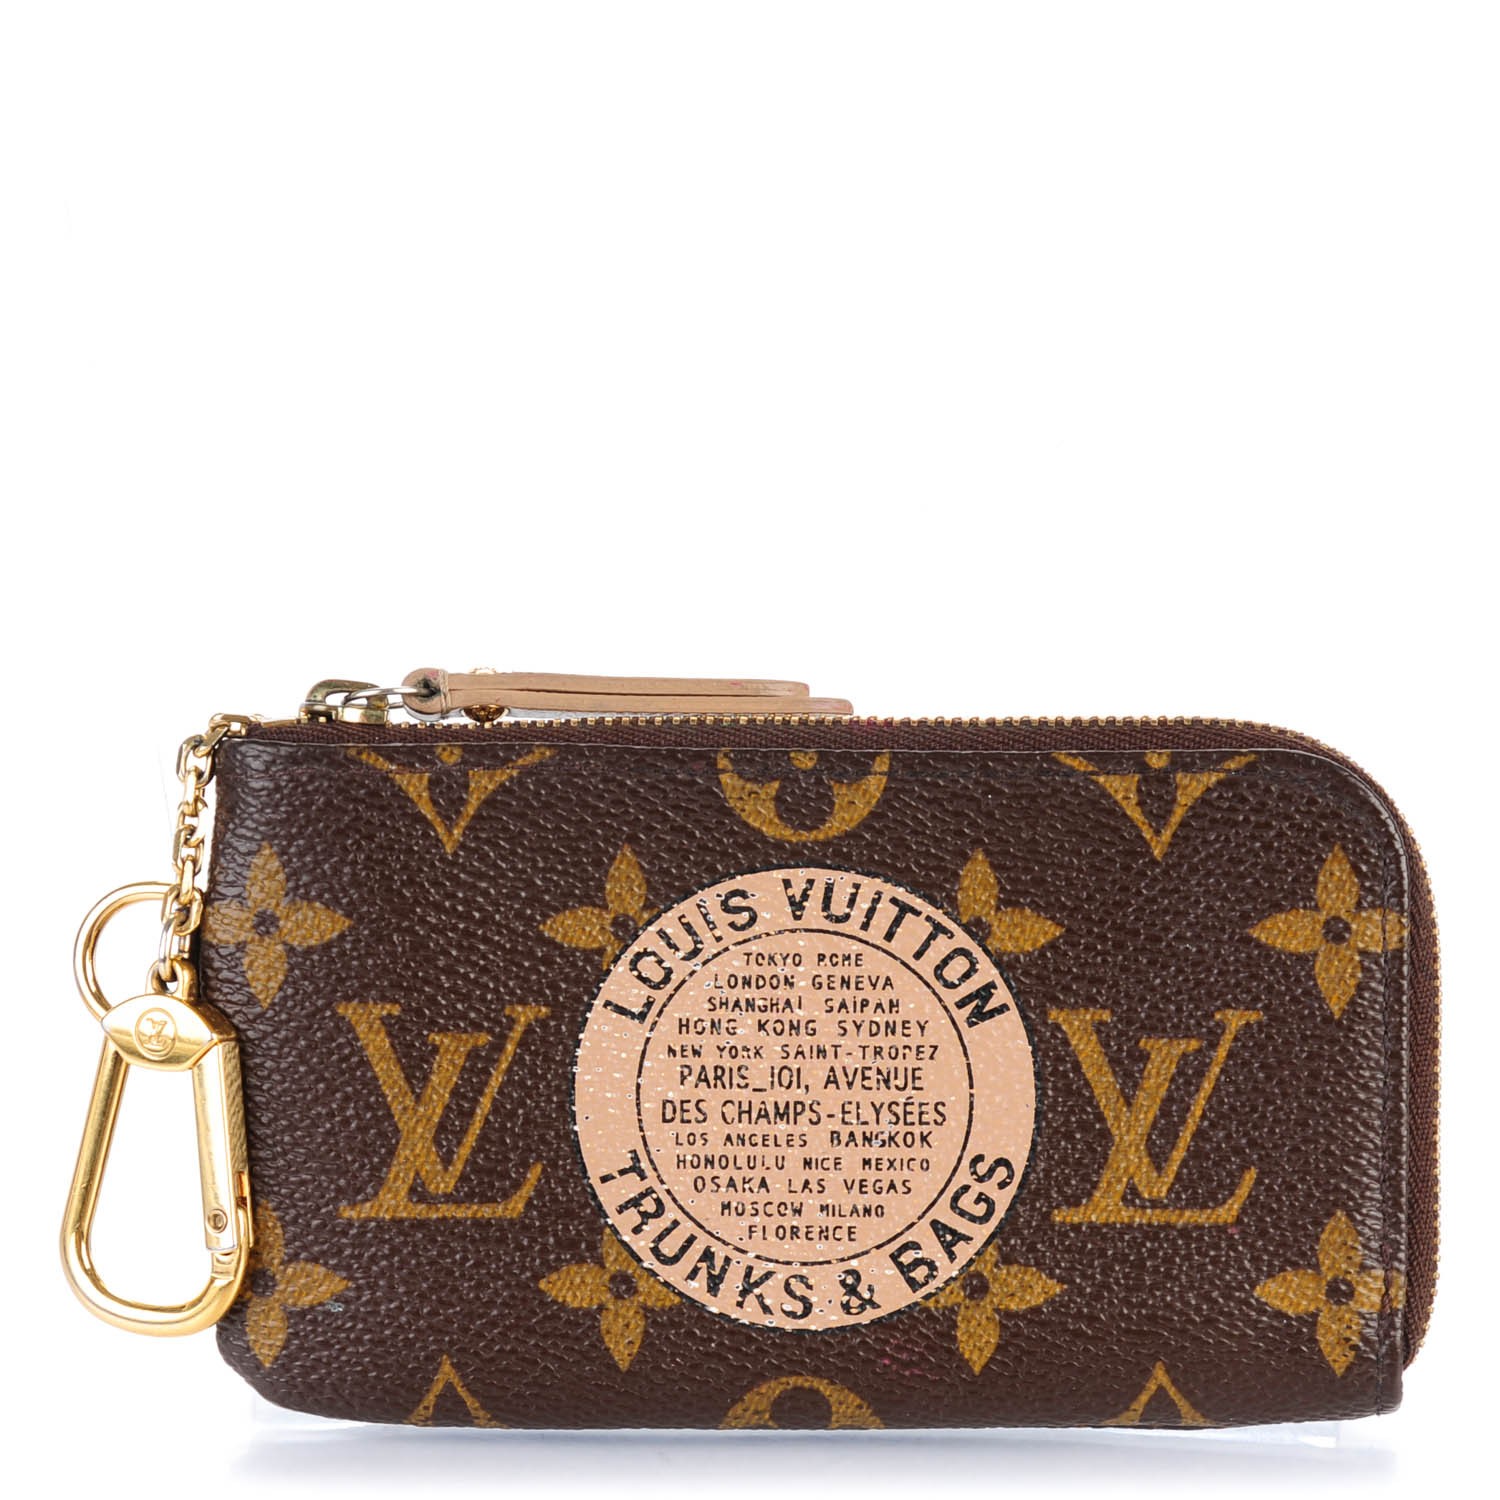 LOUIS VUITTON Monogram Complice Trunks and Bags Key Pouch 151704